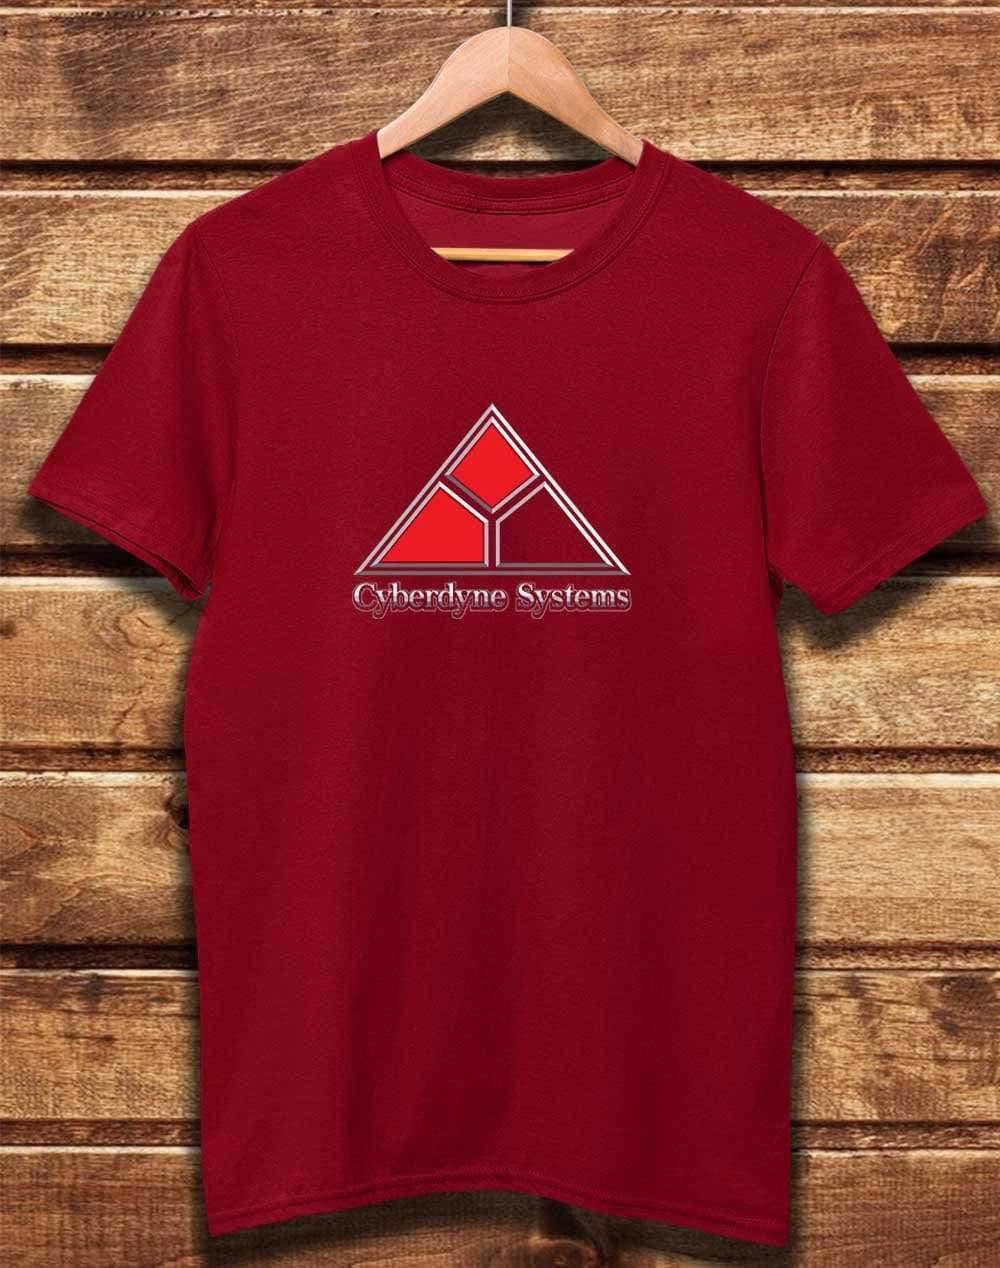 DELUXE Cyberdyne Systems Organic Cotton T-Shirt XS / Dark Red  - Off World Tees